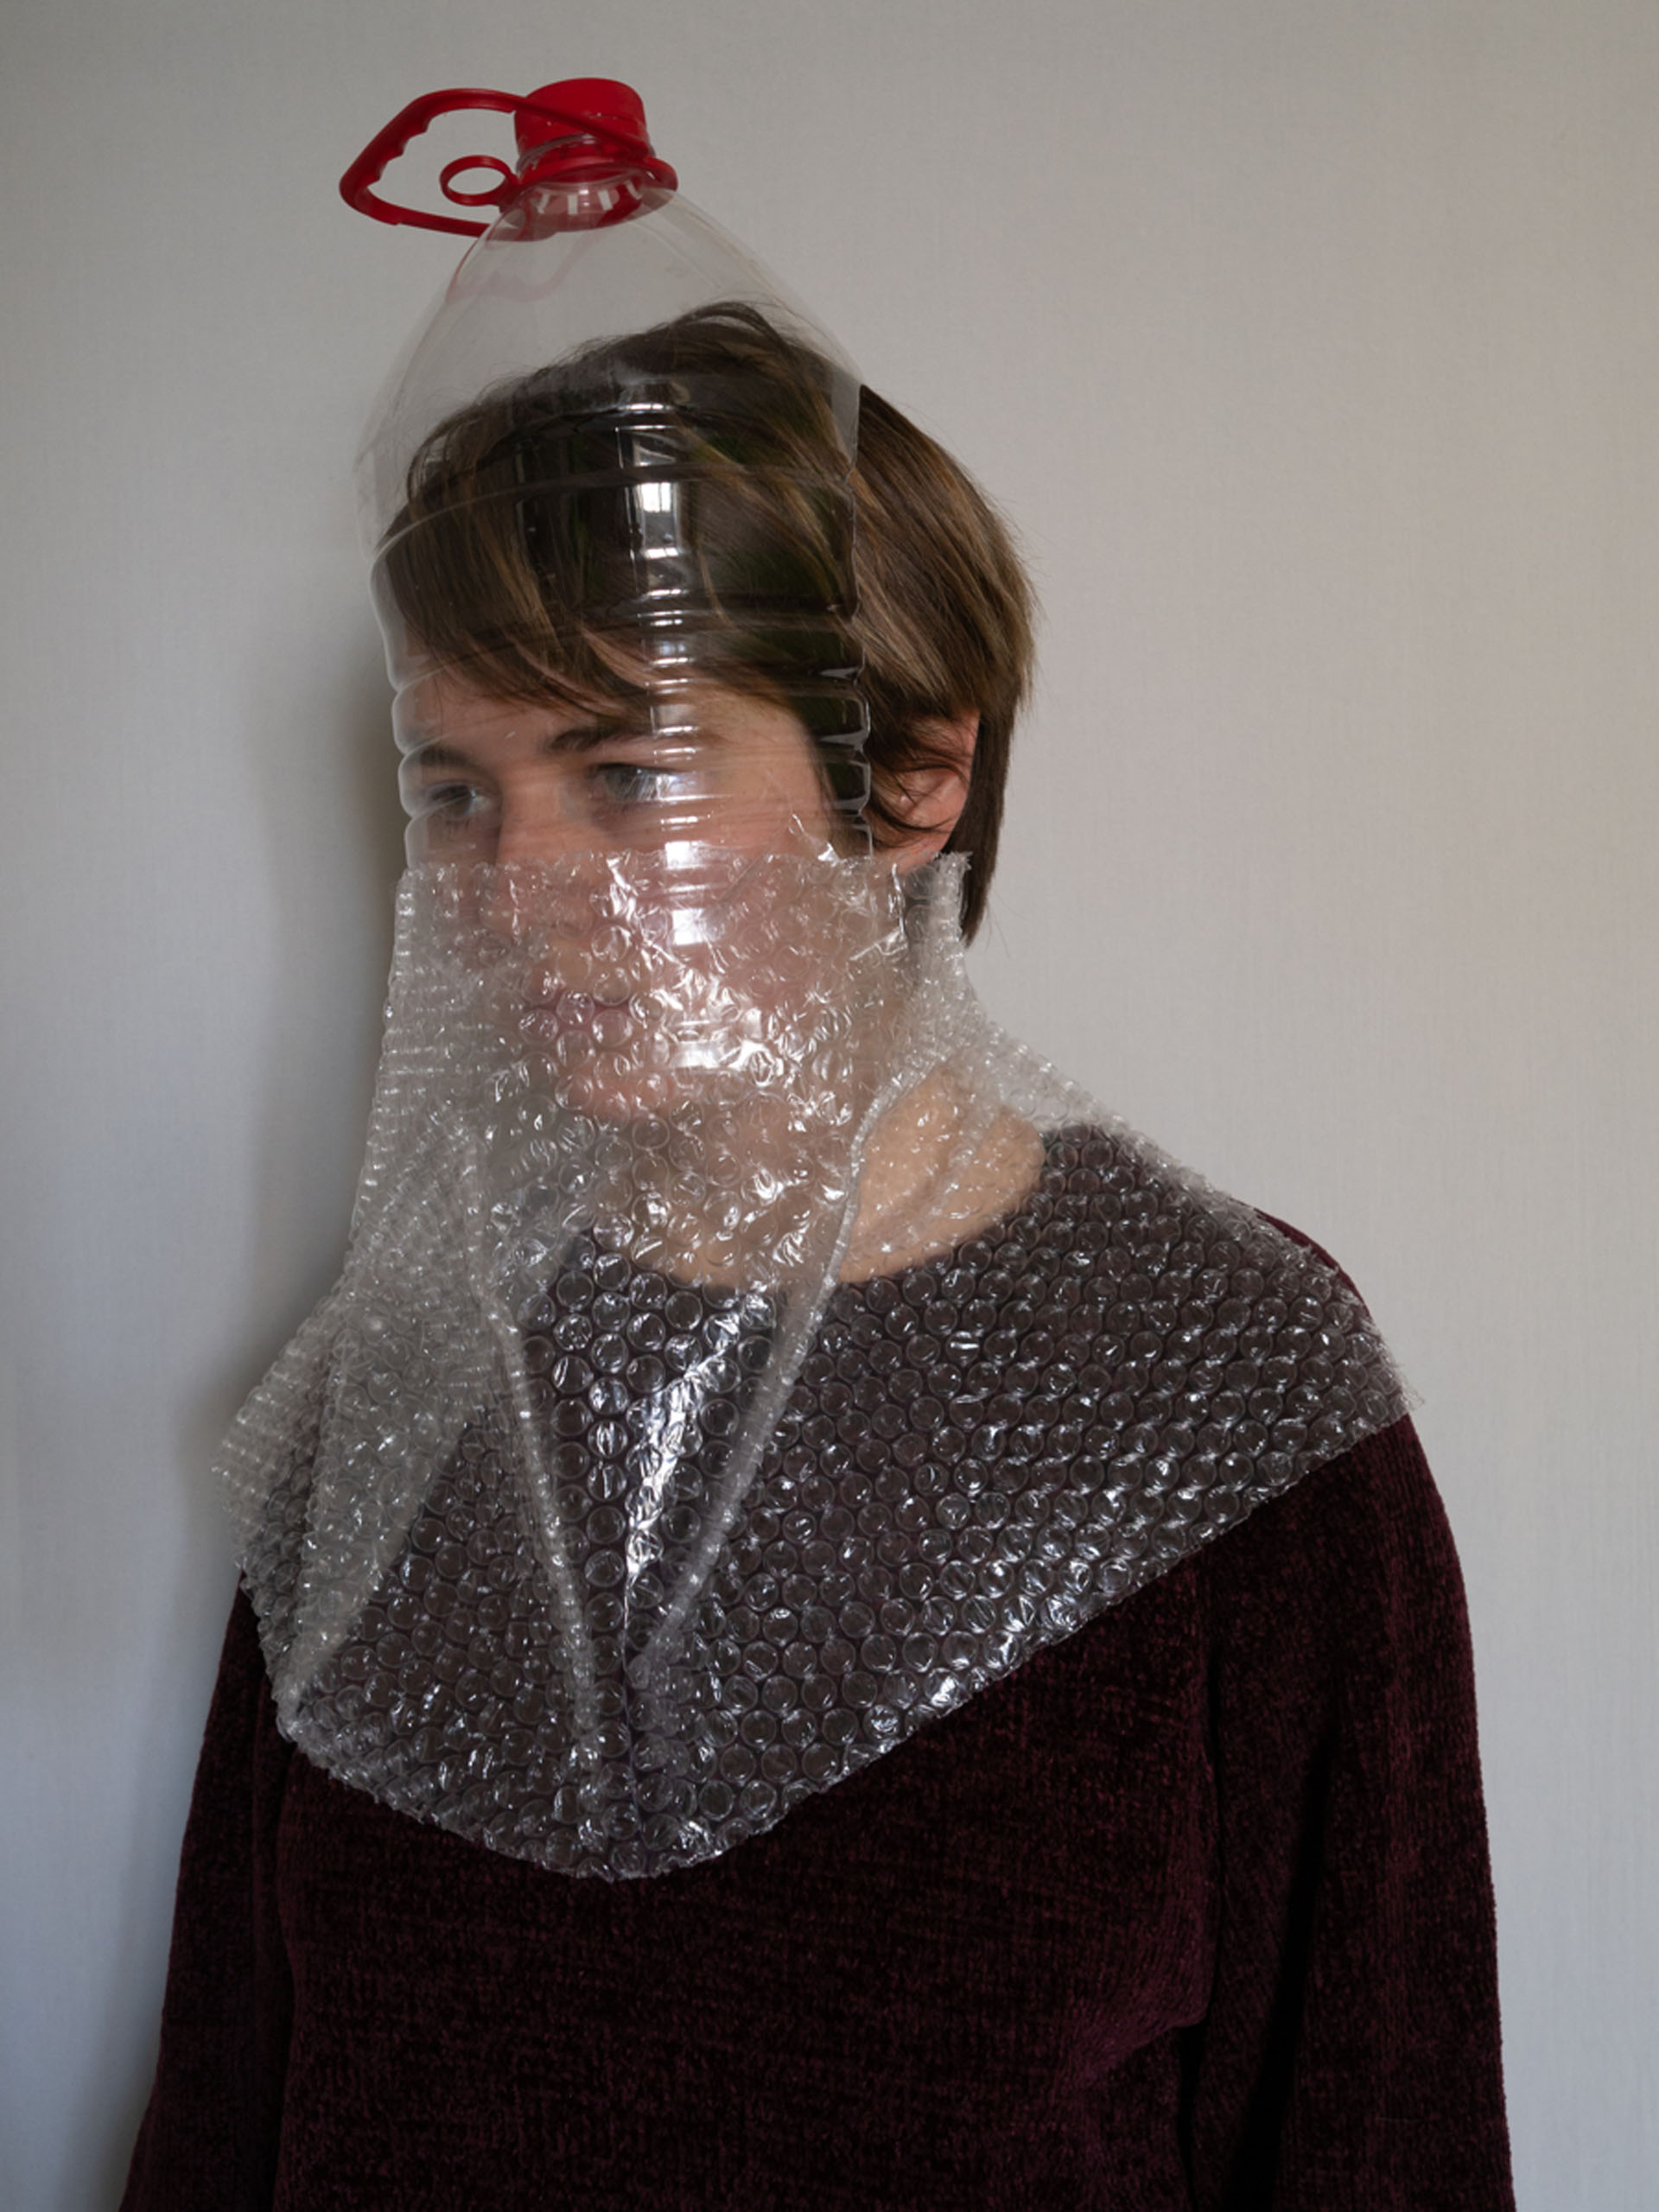 A homemade medical mask made from a plastic bottle